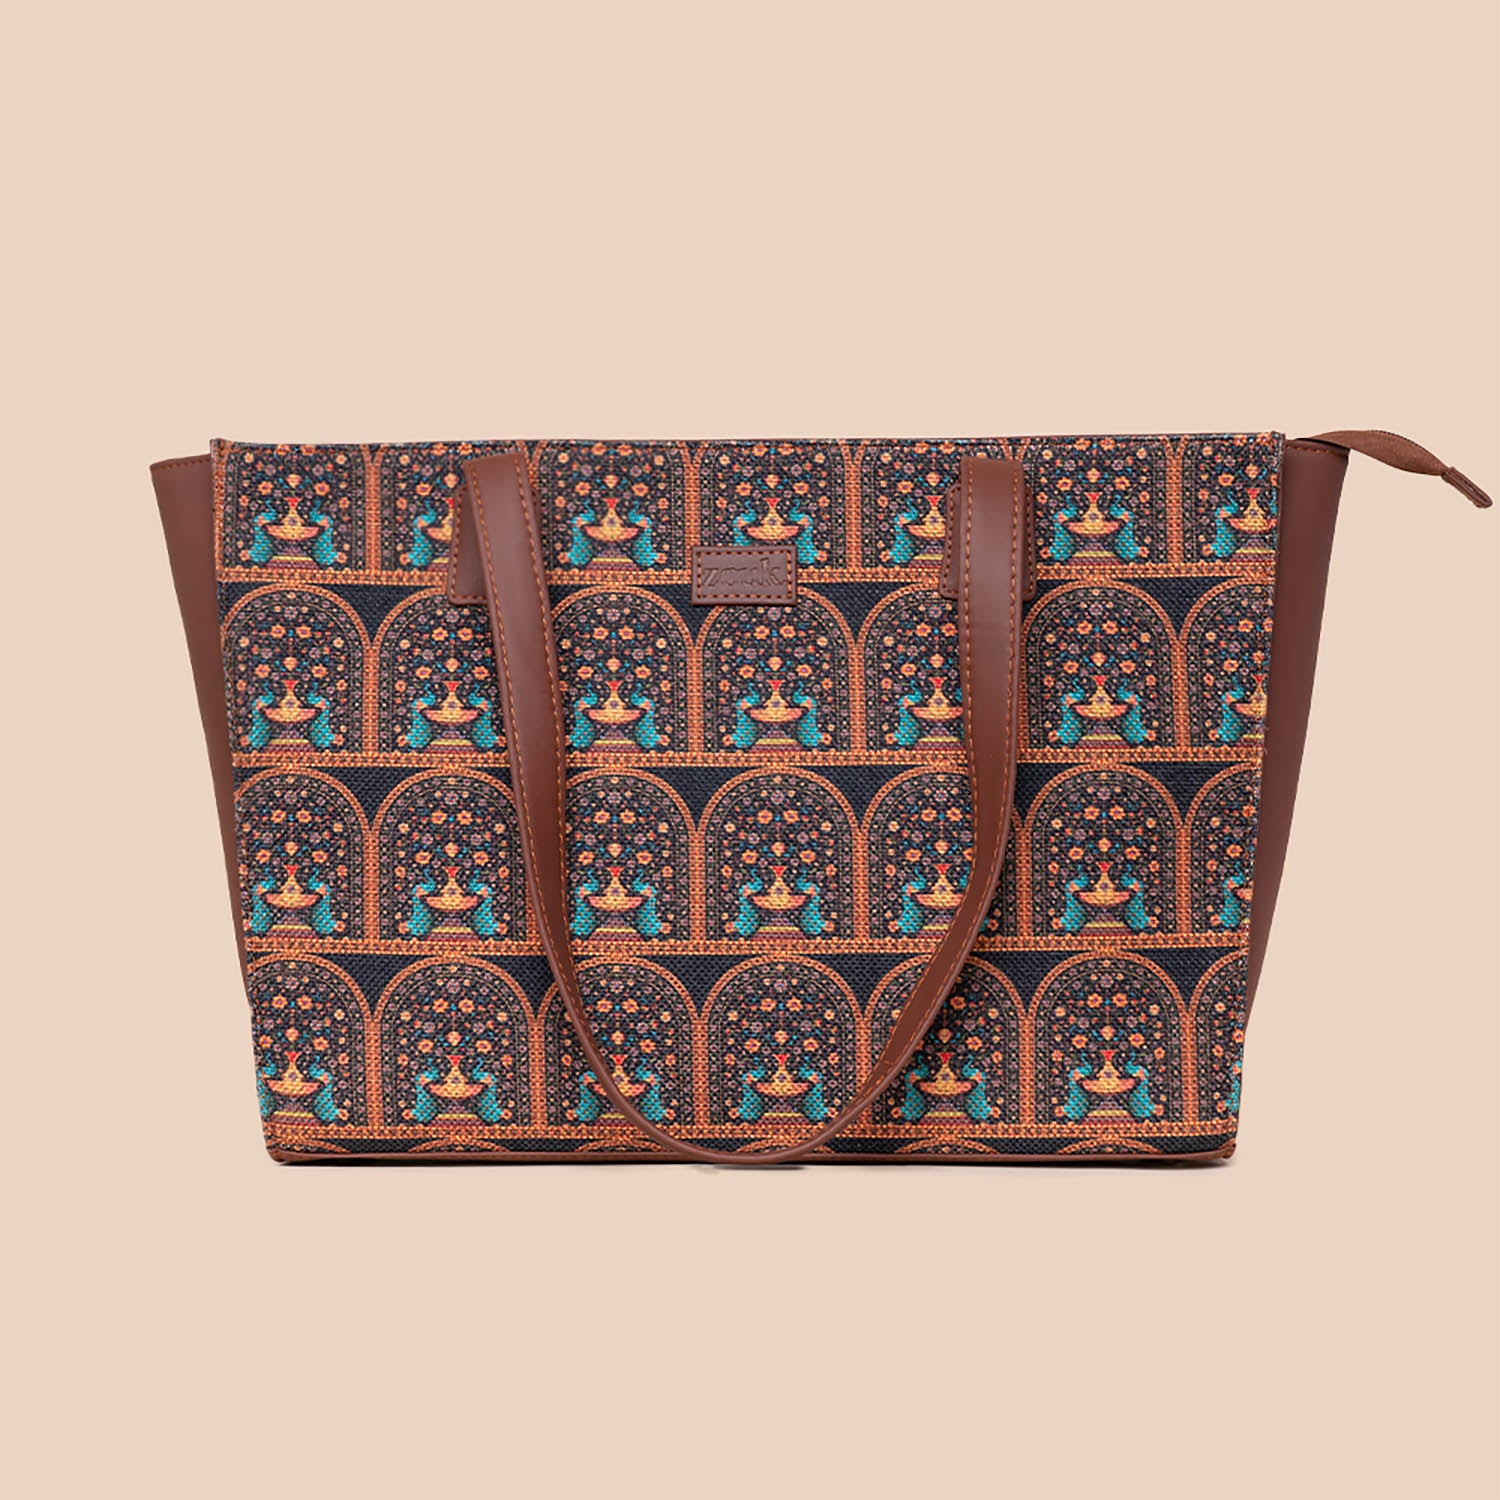 Royal Indian Peacock Motif - Office Tote Bag & Chain Wallet Combo